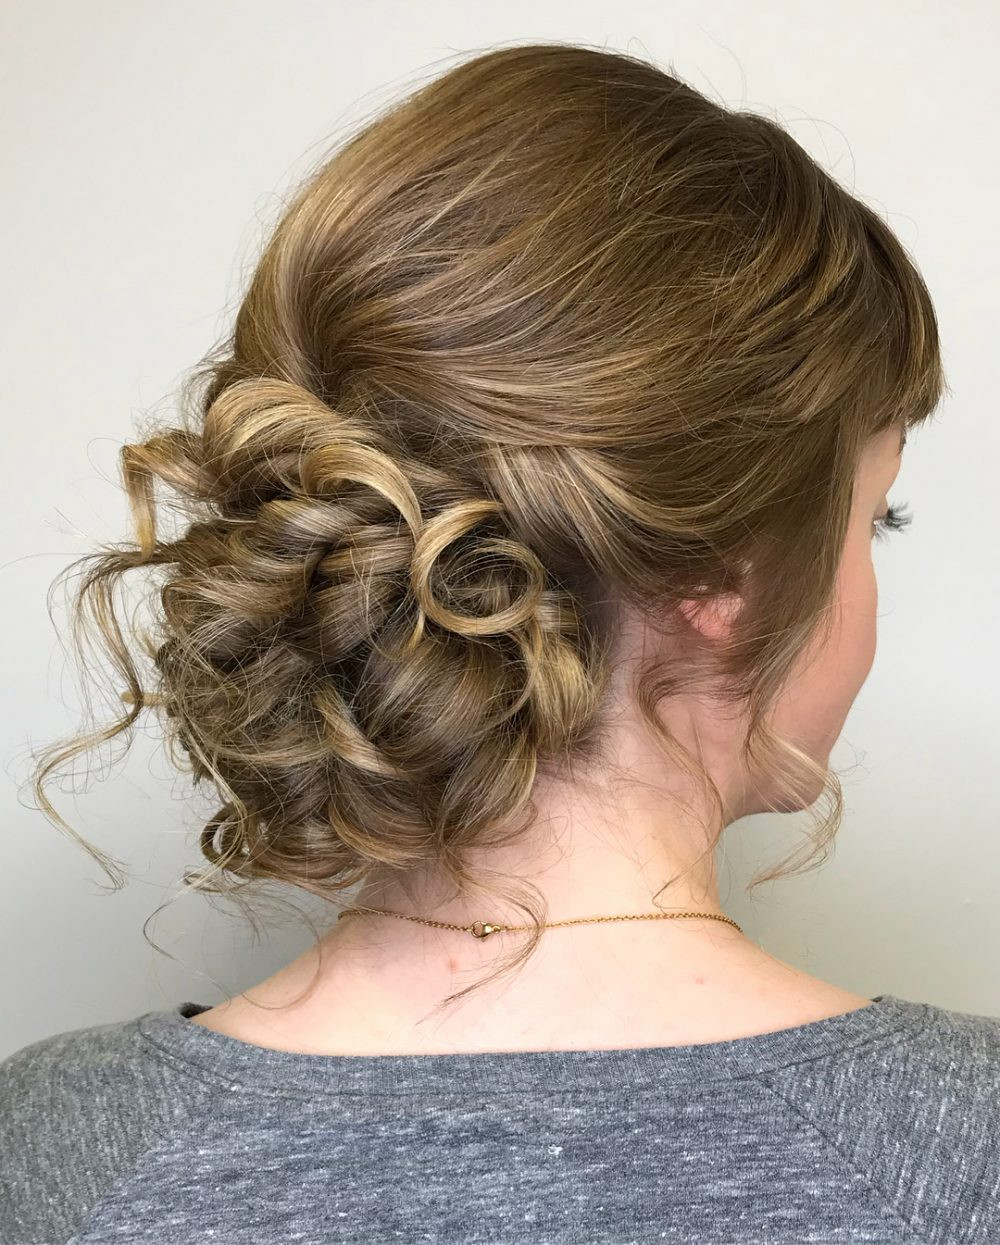 Cute Updo Hairstyles For Homecoming
 23 Cute Prom Hairstyles for 2020 Updos Braids Half Ups